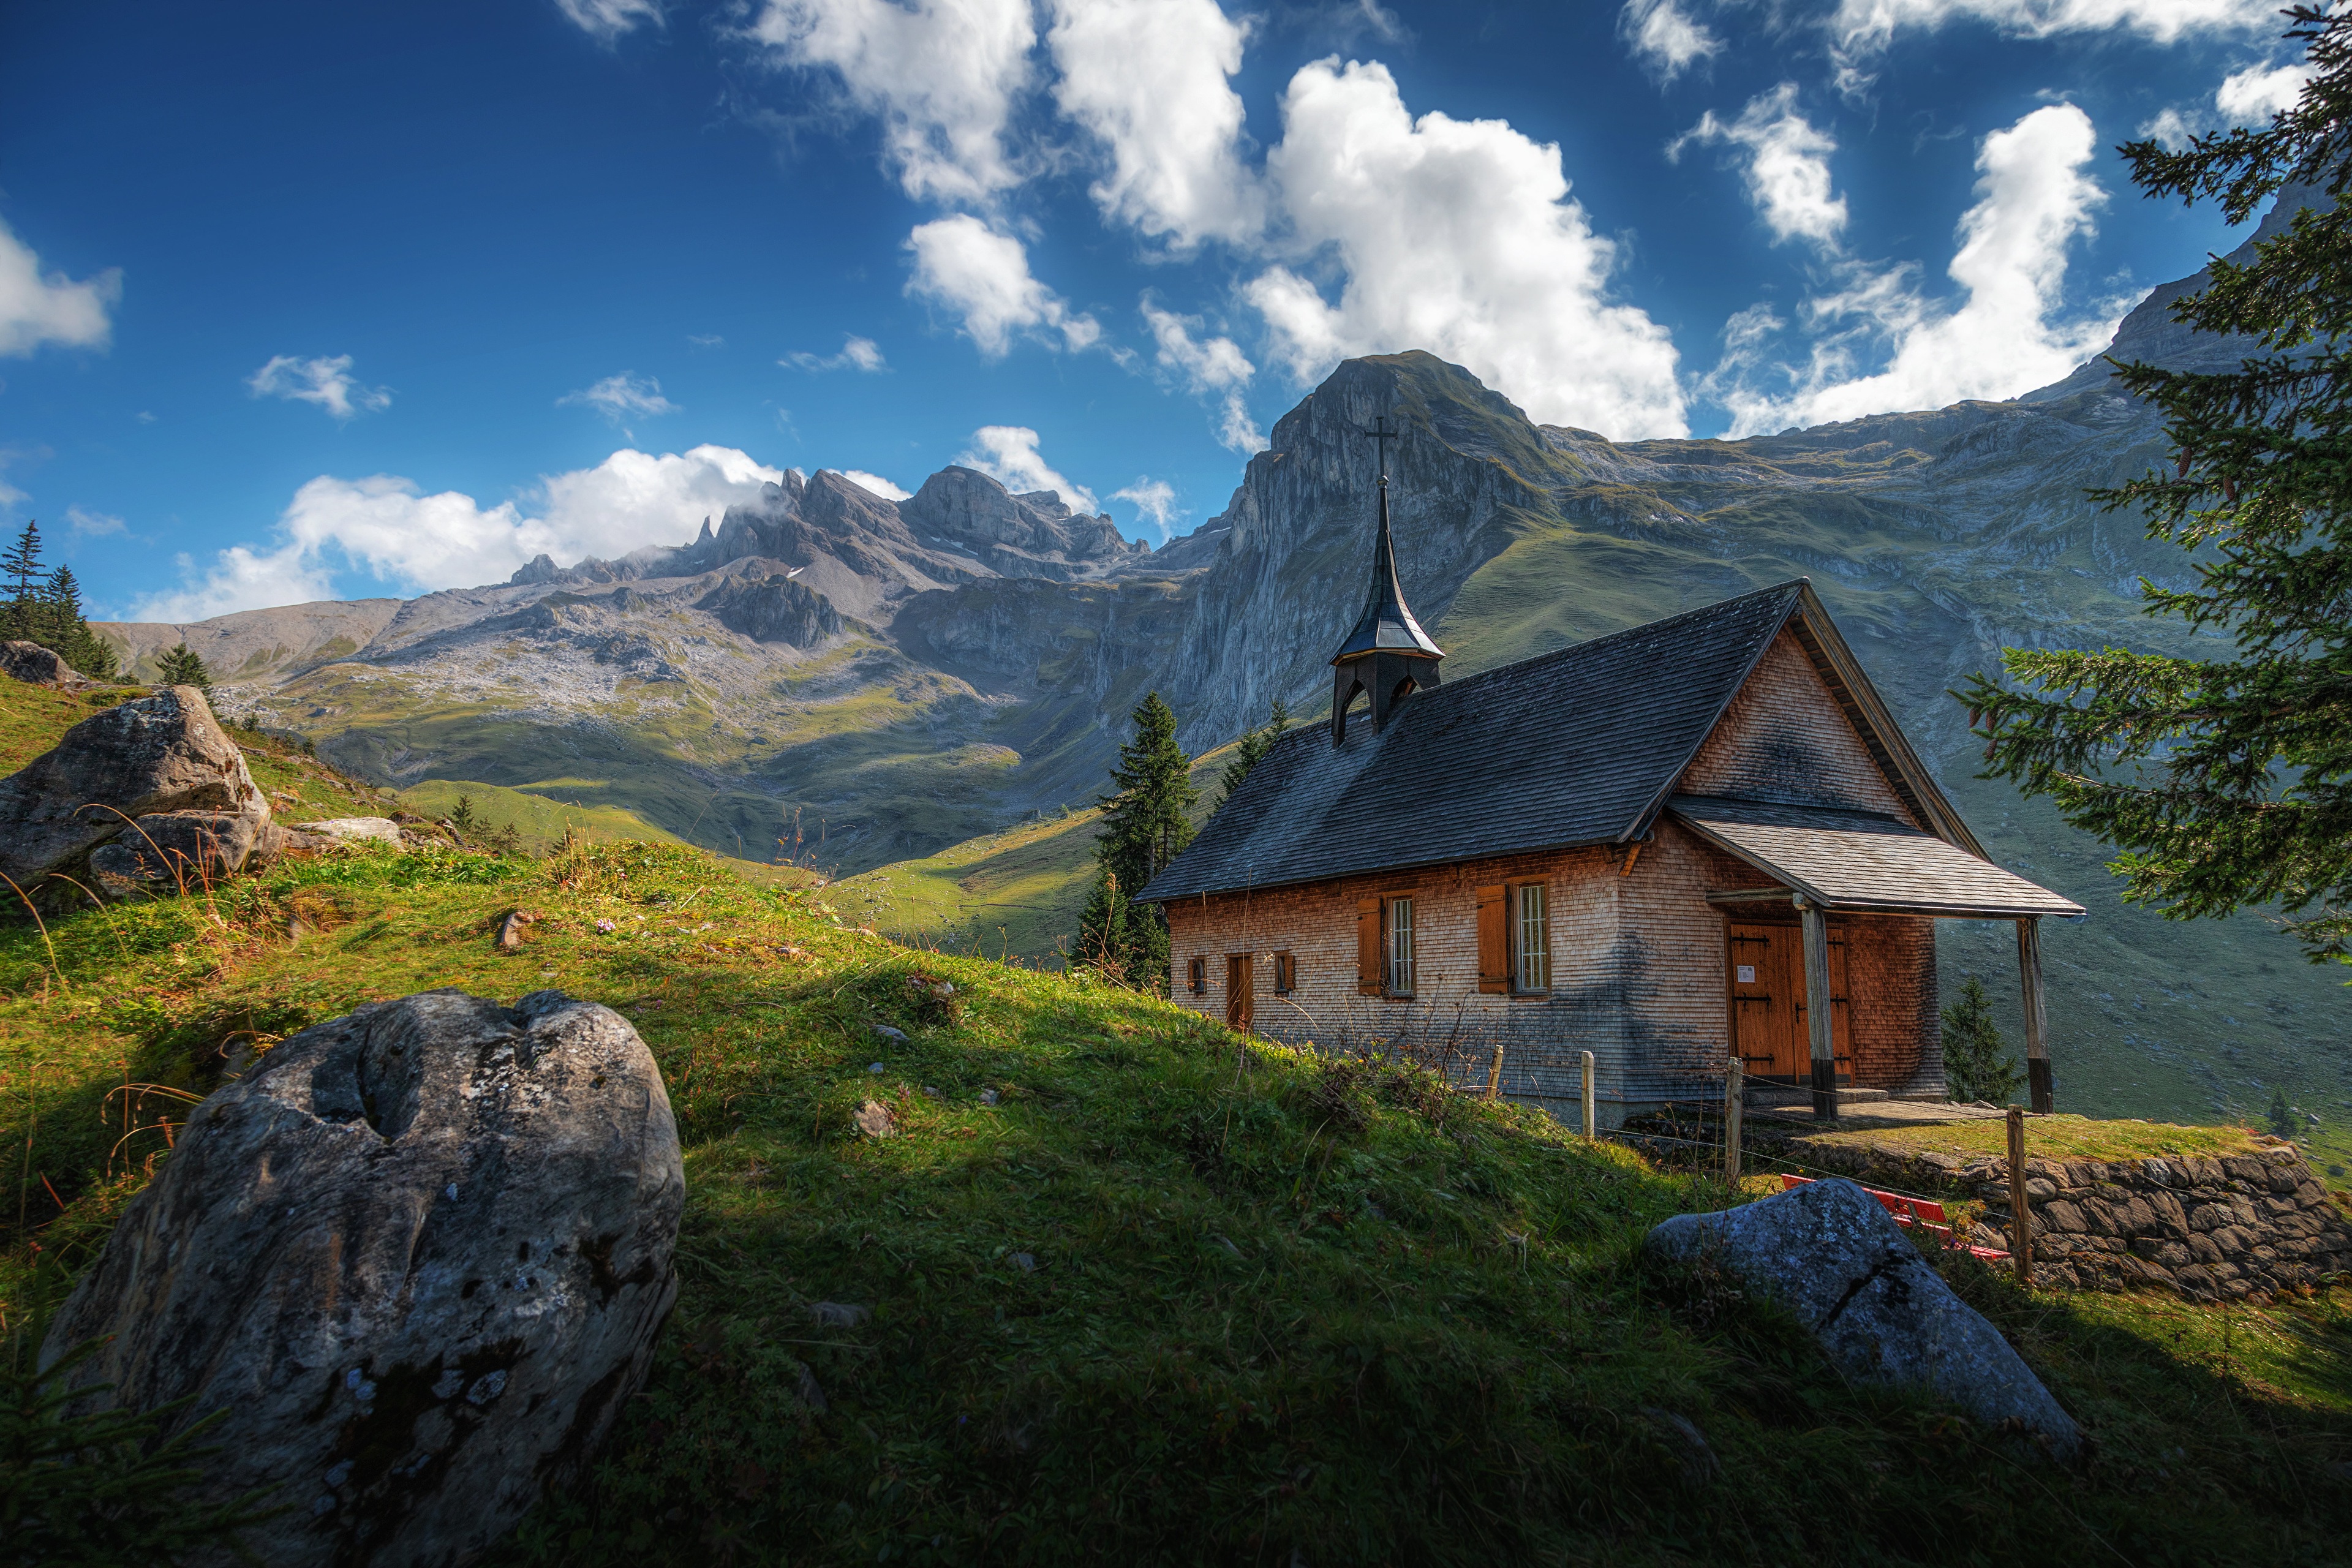 General 3840x2560 landscape nature Switzerland mountains sky clouds house grass shadow